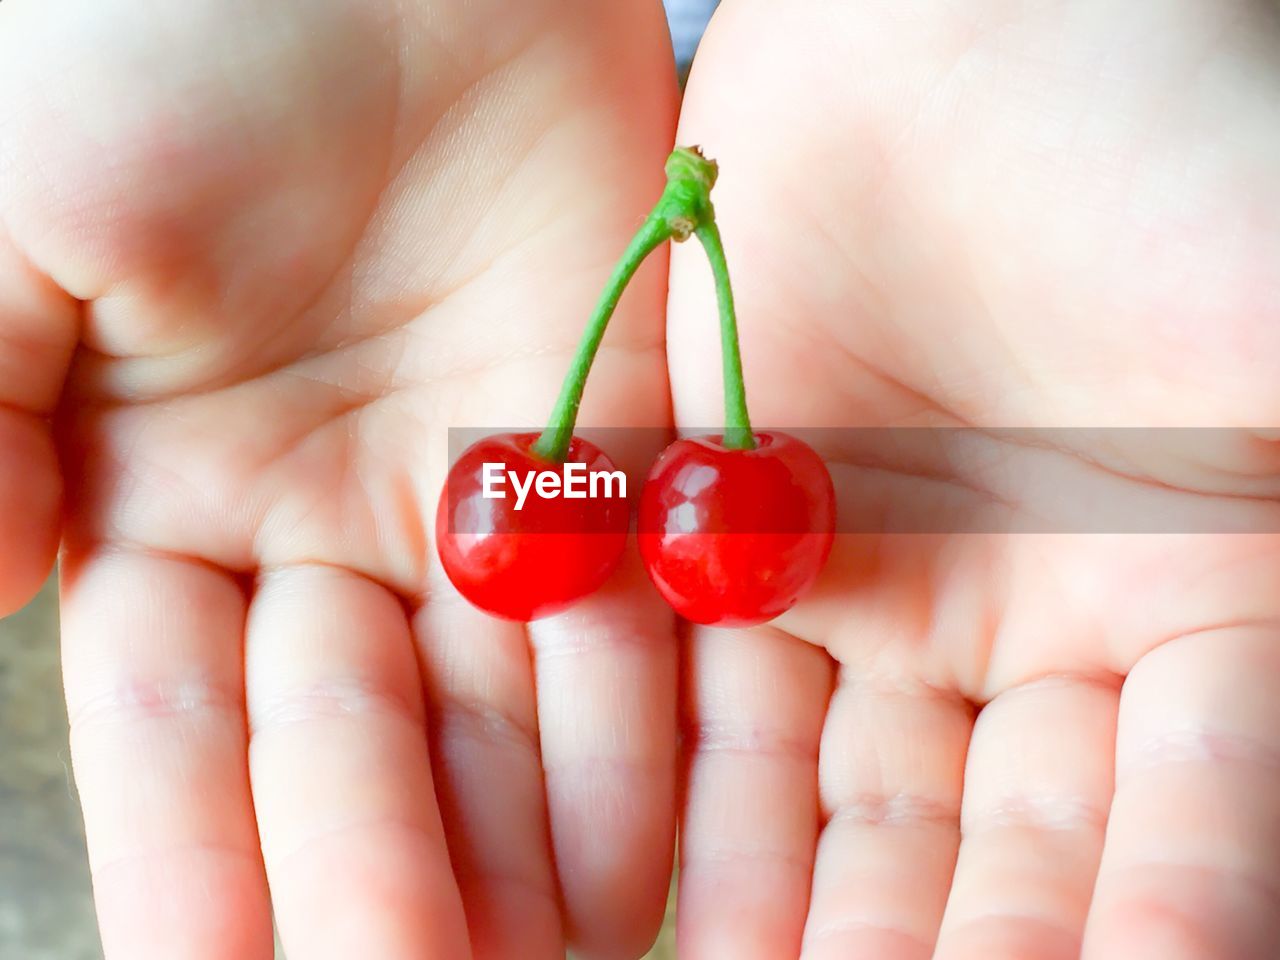 CLOSE-UP OF HAND HOLDING RED BERRIES